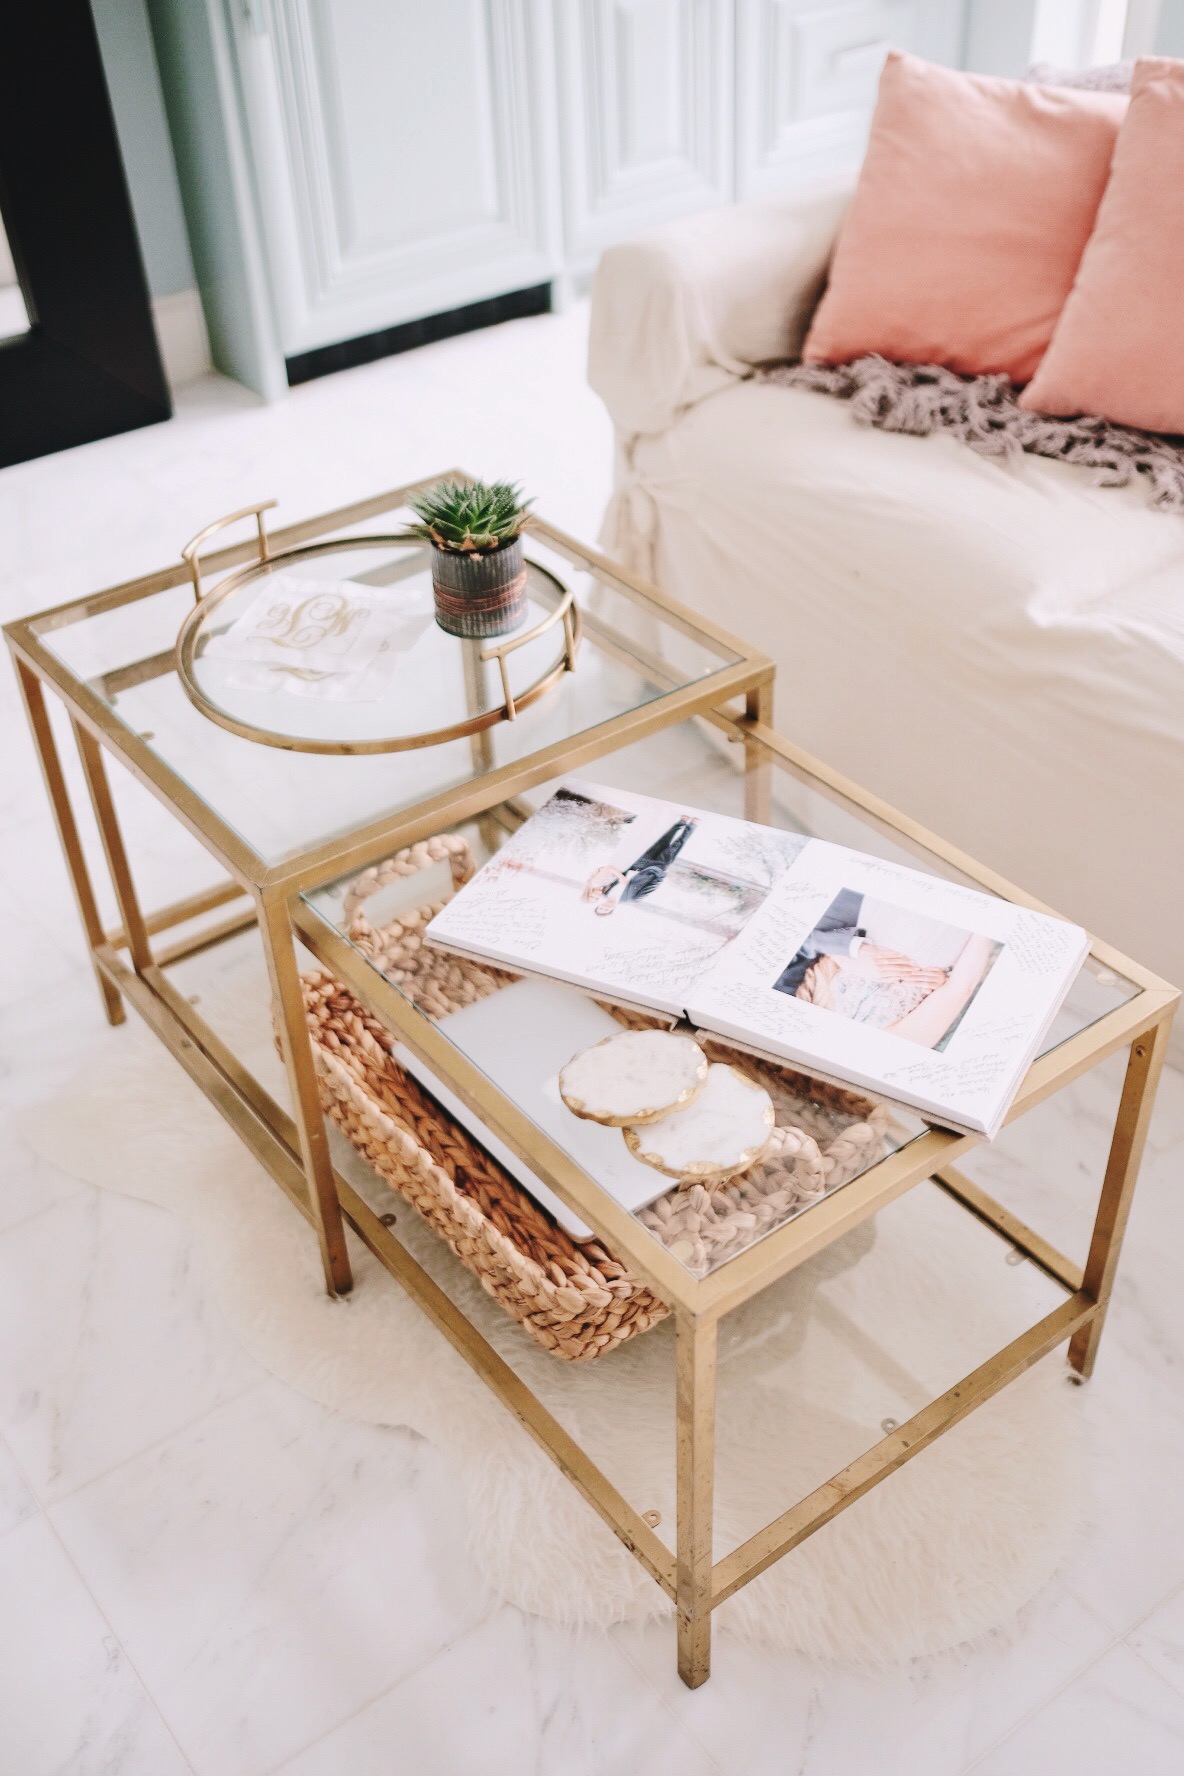 Coffee table decor | Miss Madeline Rose